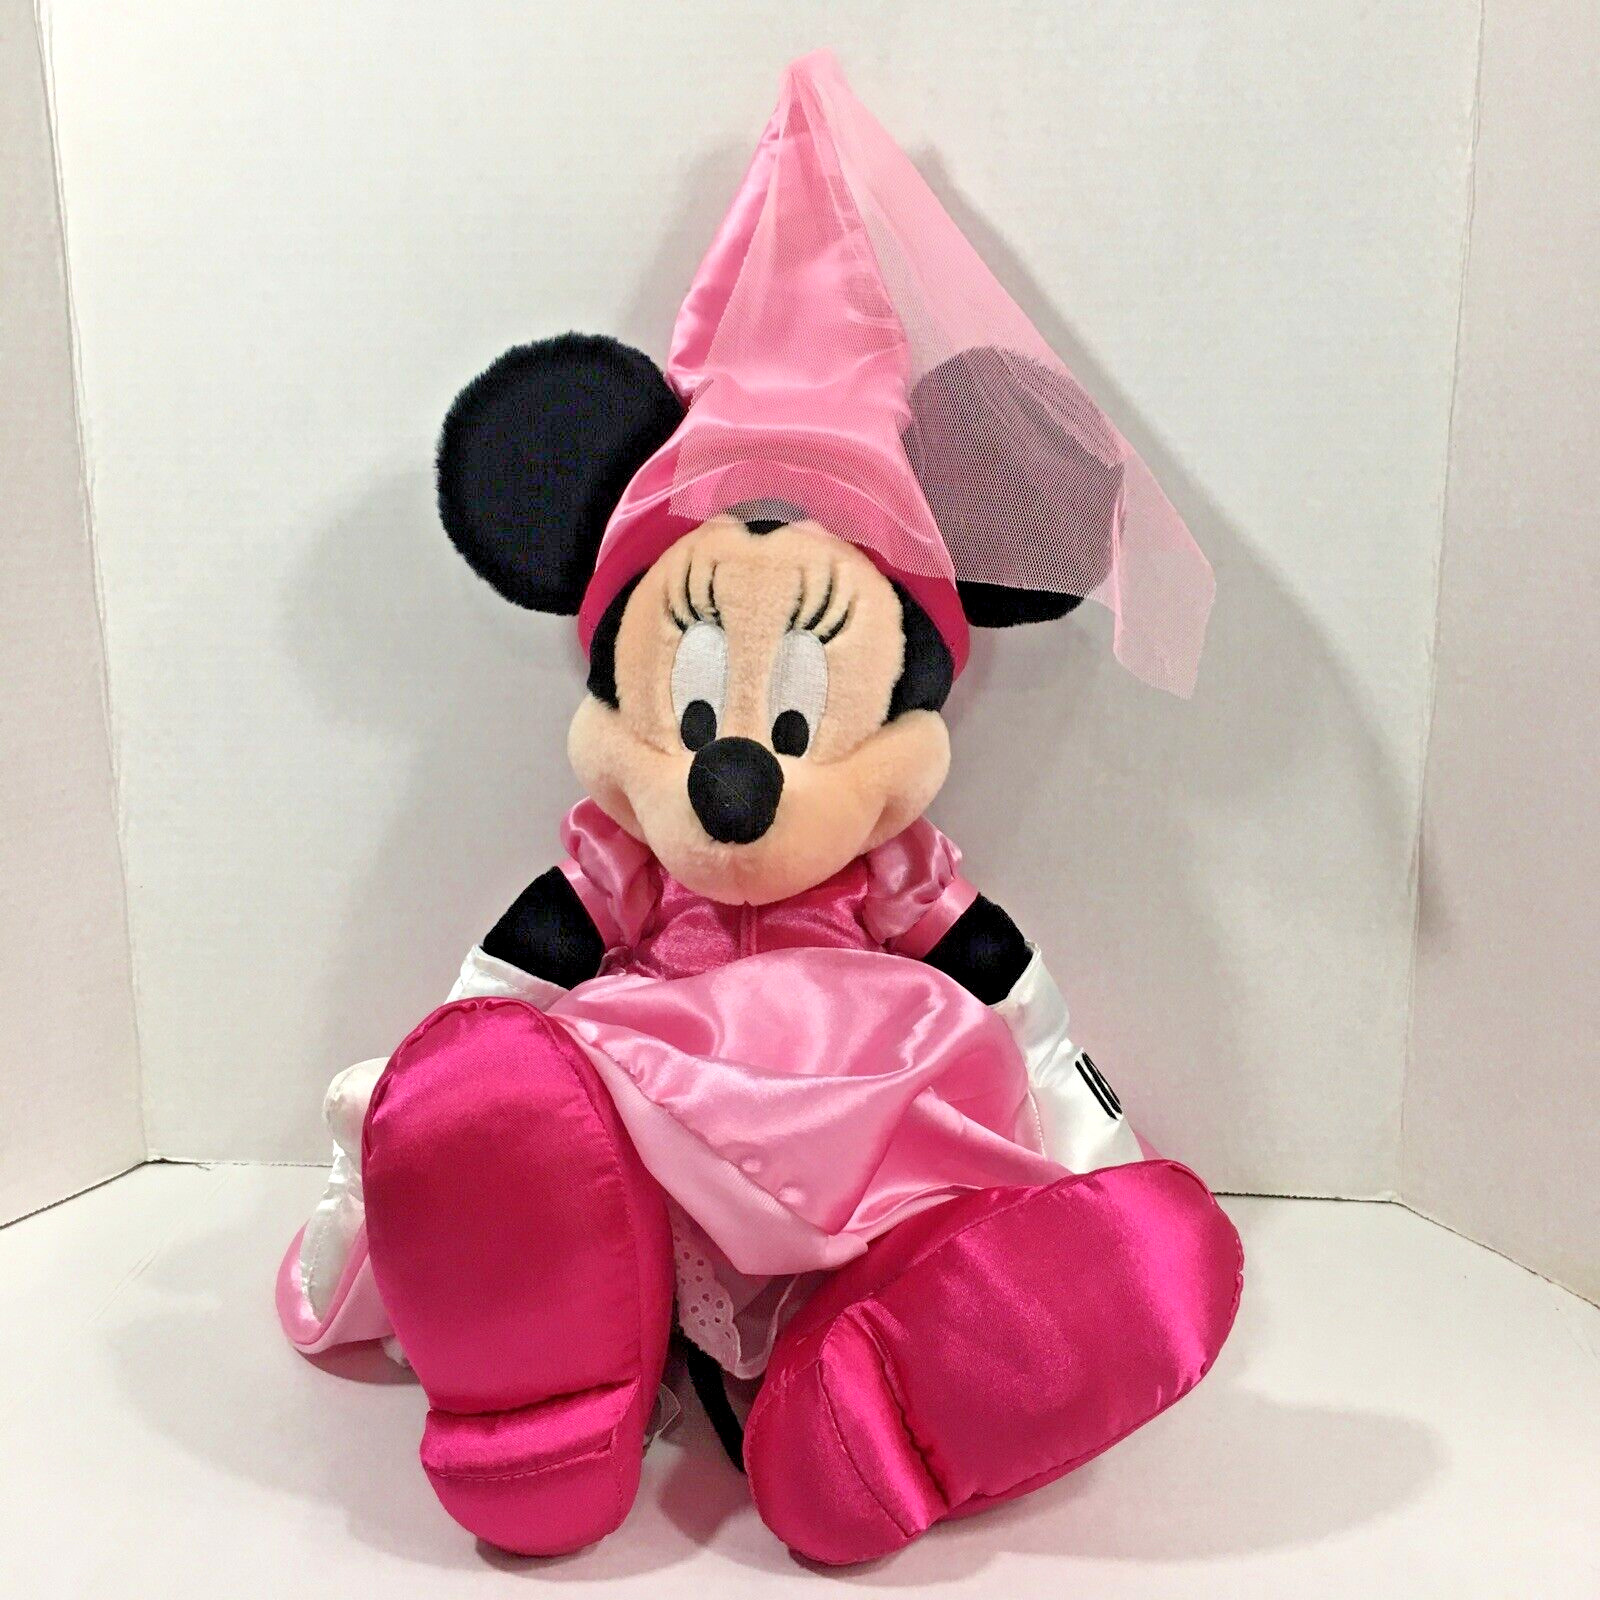 DISNEY PARKS Minnie Mouse in Pink Princess & Veil Outfit 22-in Plush Toy